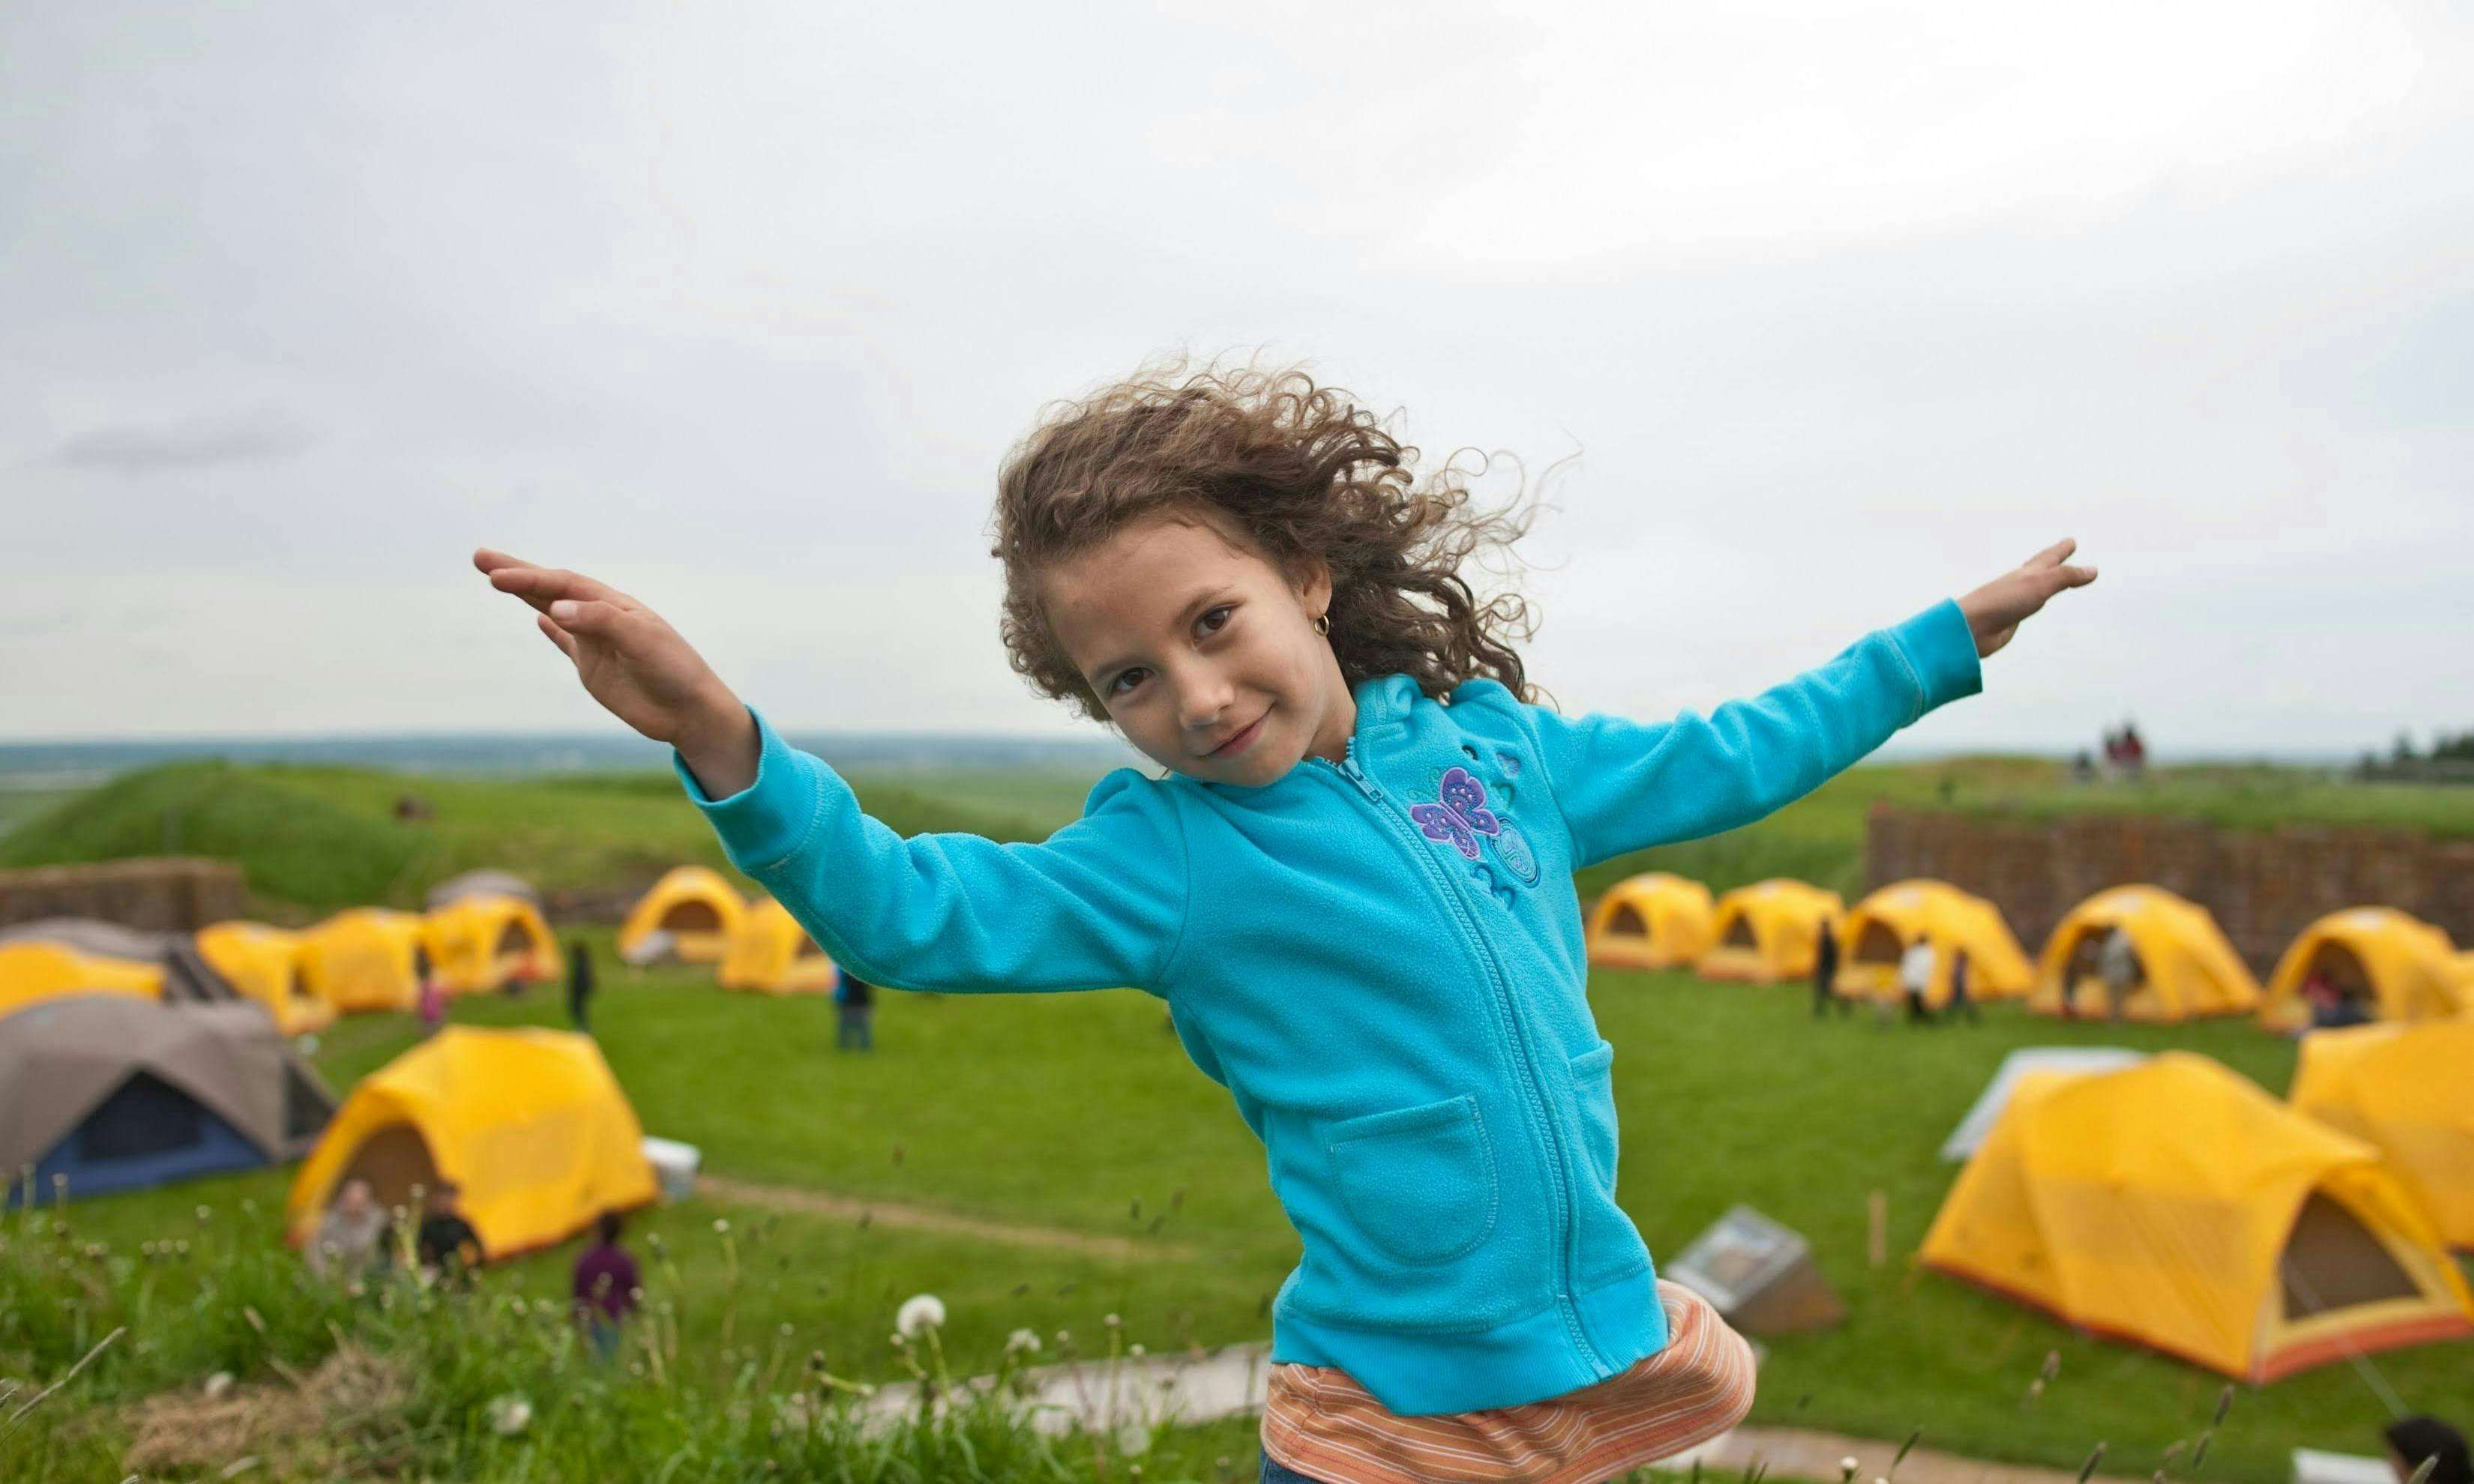 Kid at a learn-to-camp event with yellow tents in a park